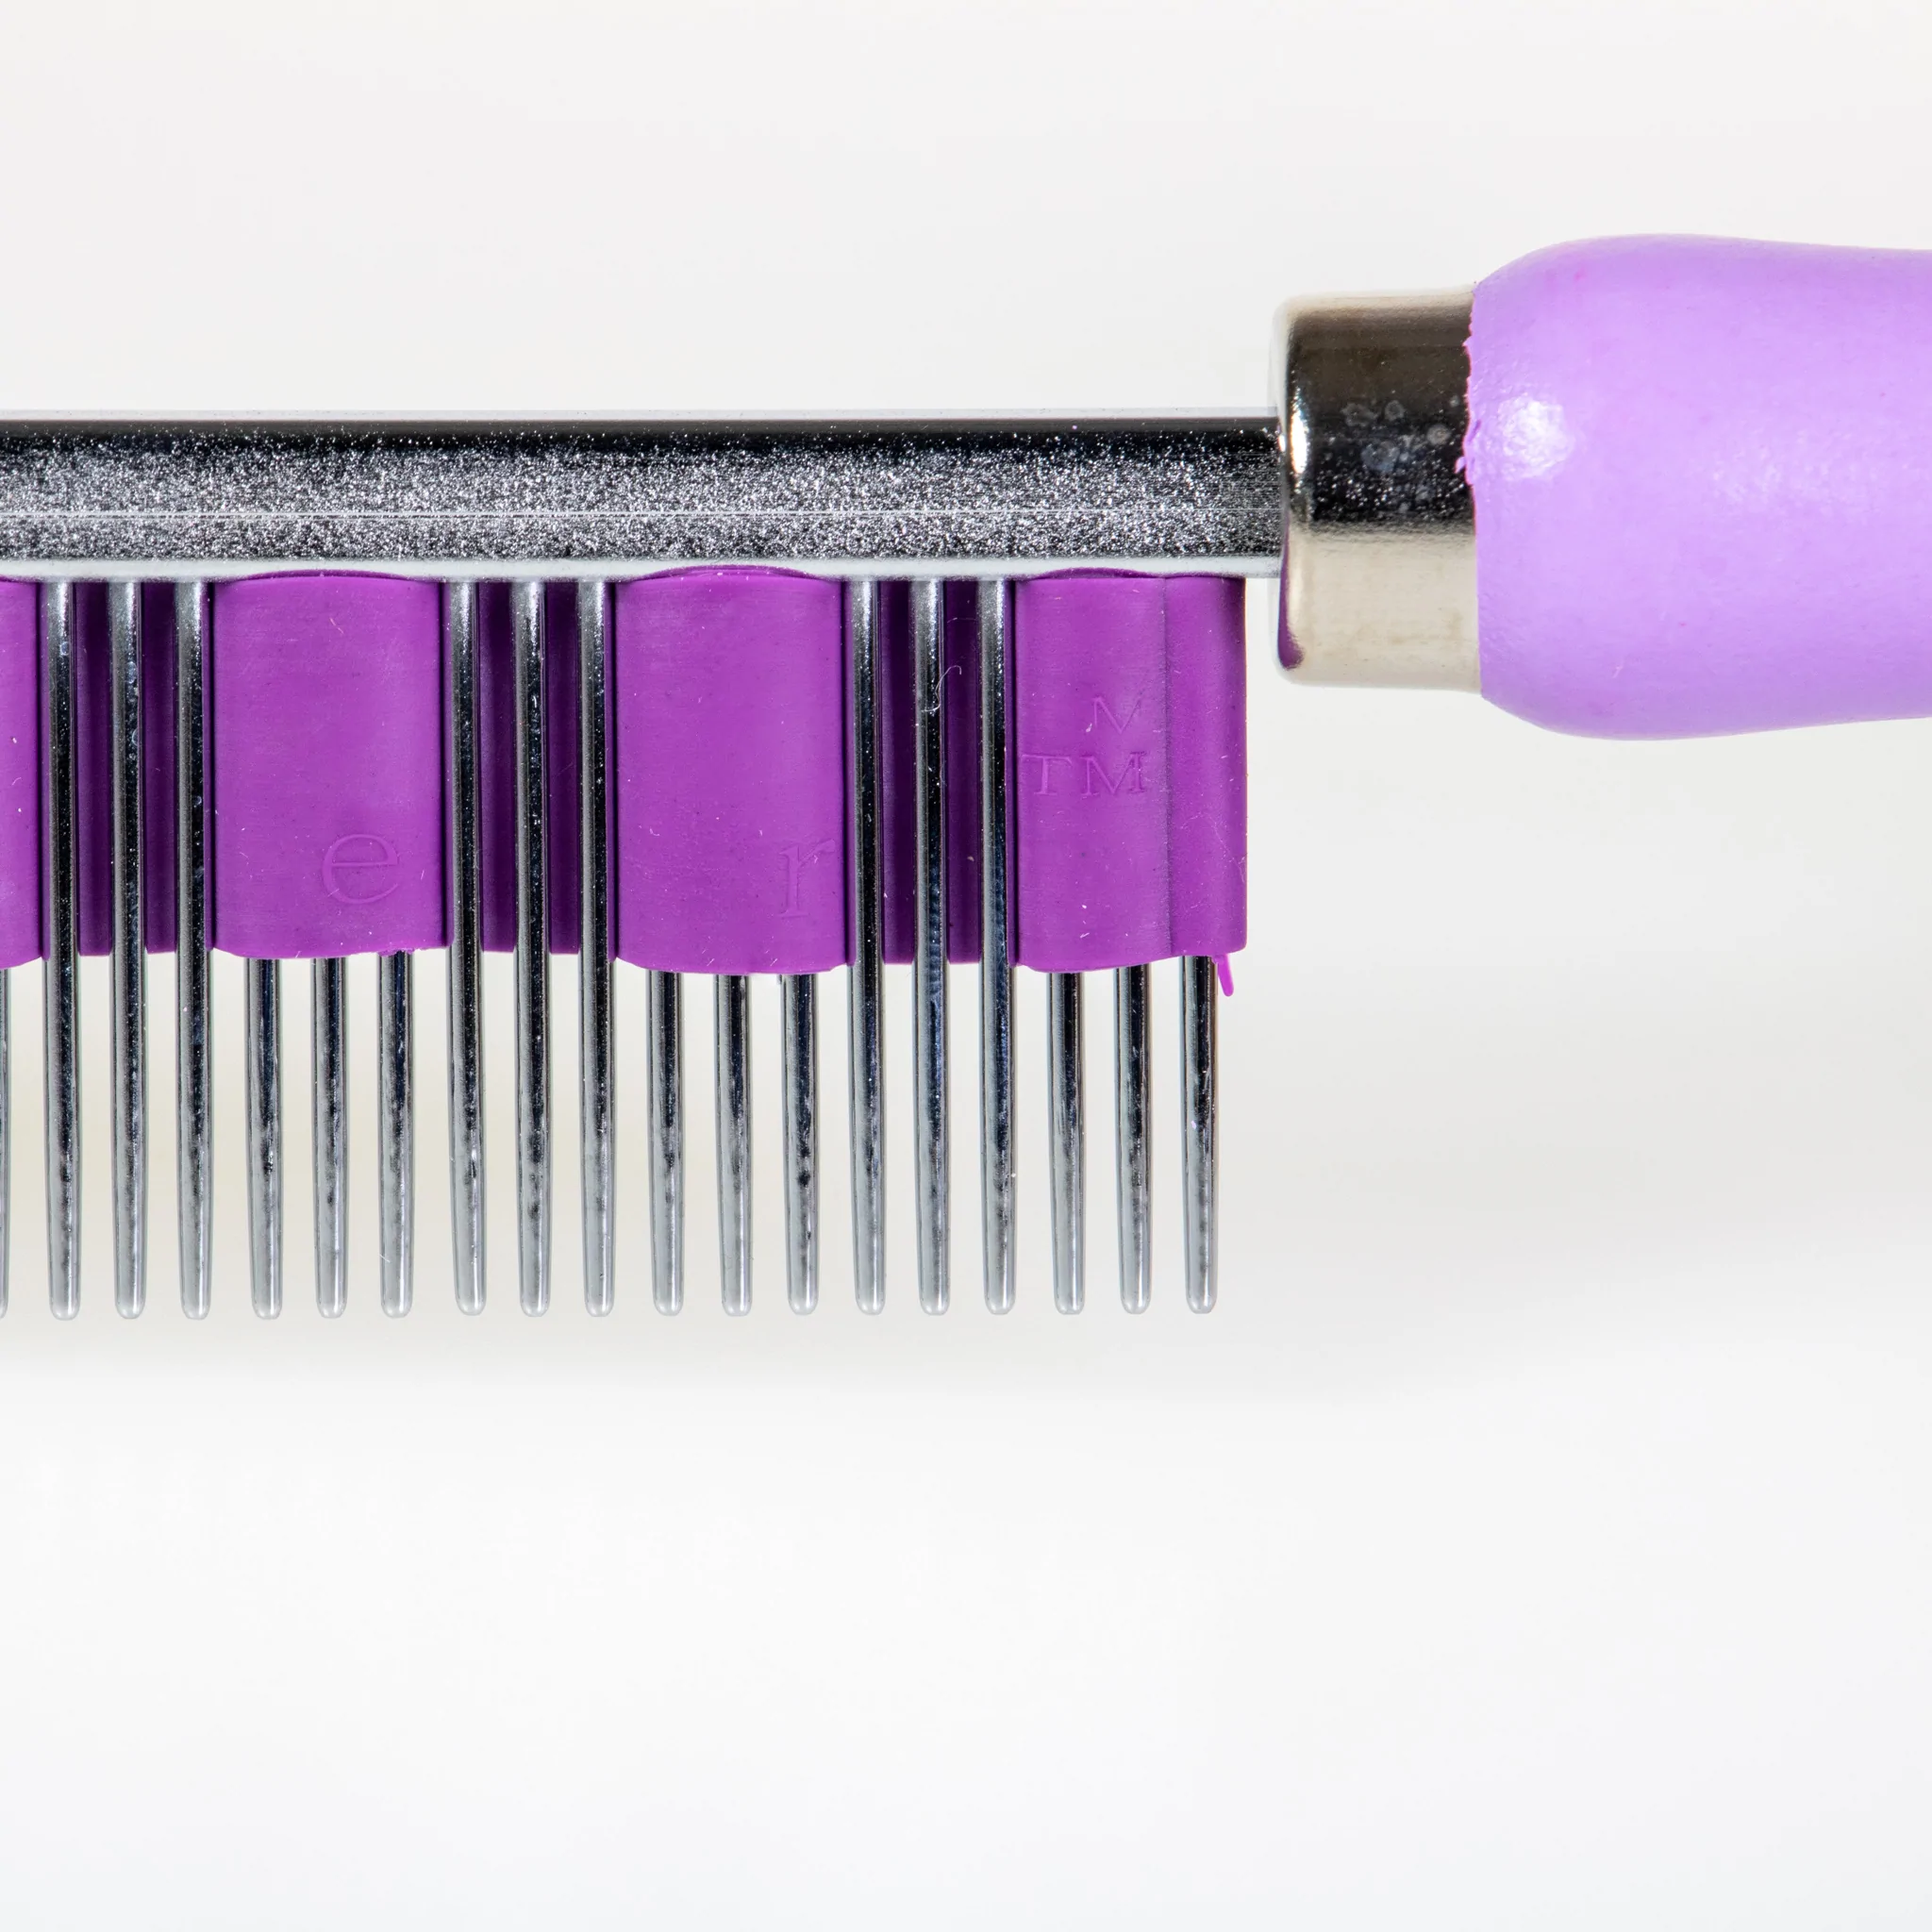 HairBuster Comb - DeShedding Tool for Small Pets